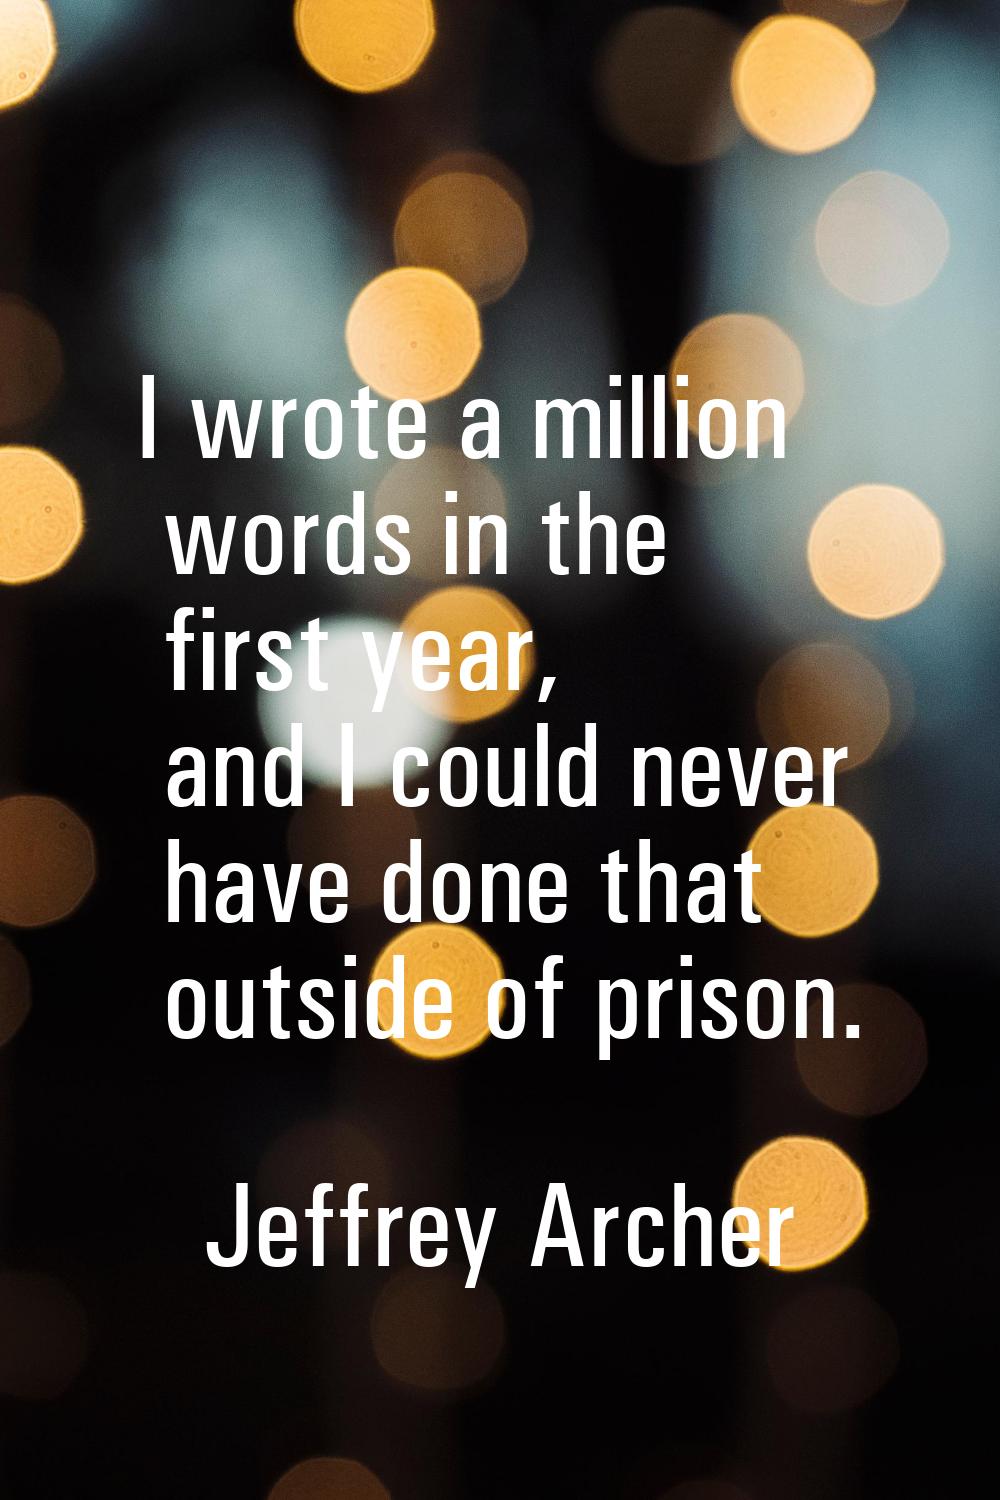 I wrote a million words in the first year, and I could never have done that outside of prison.